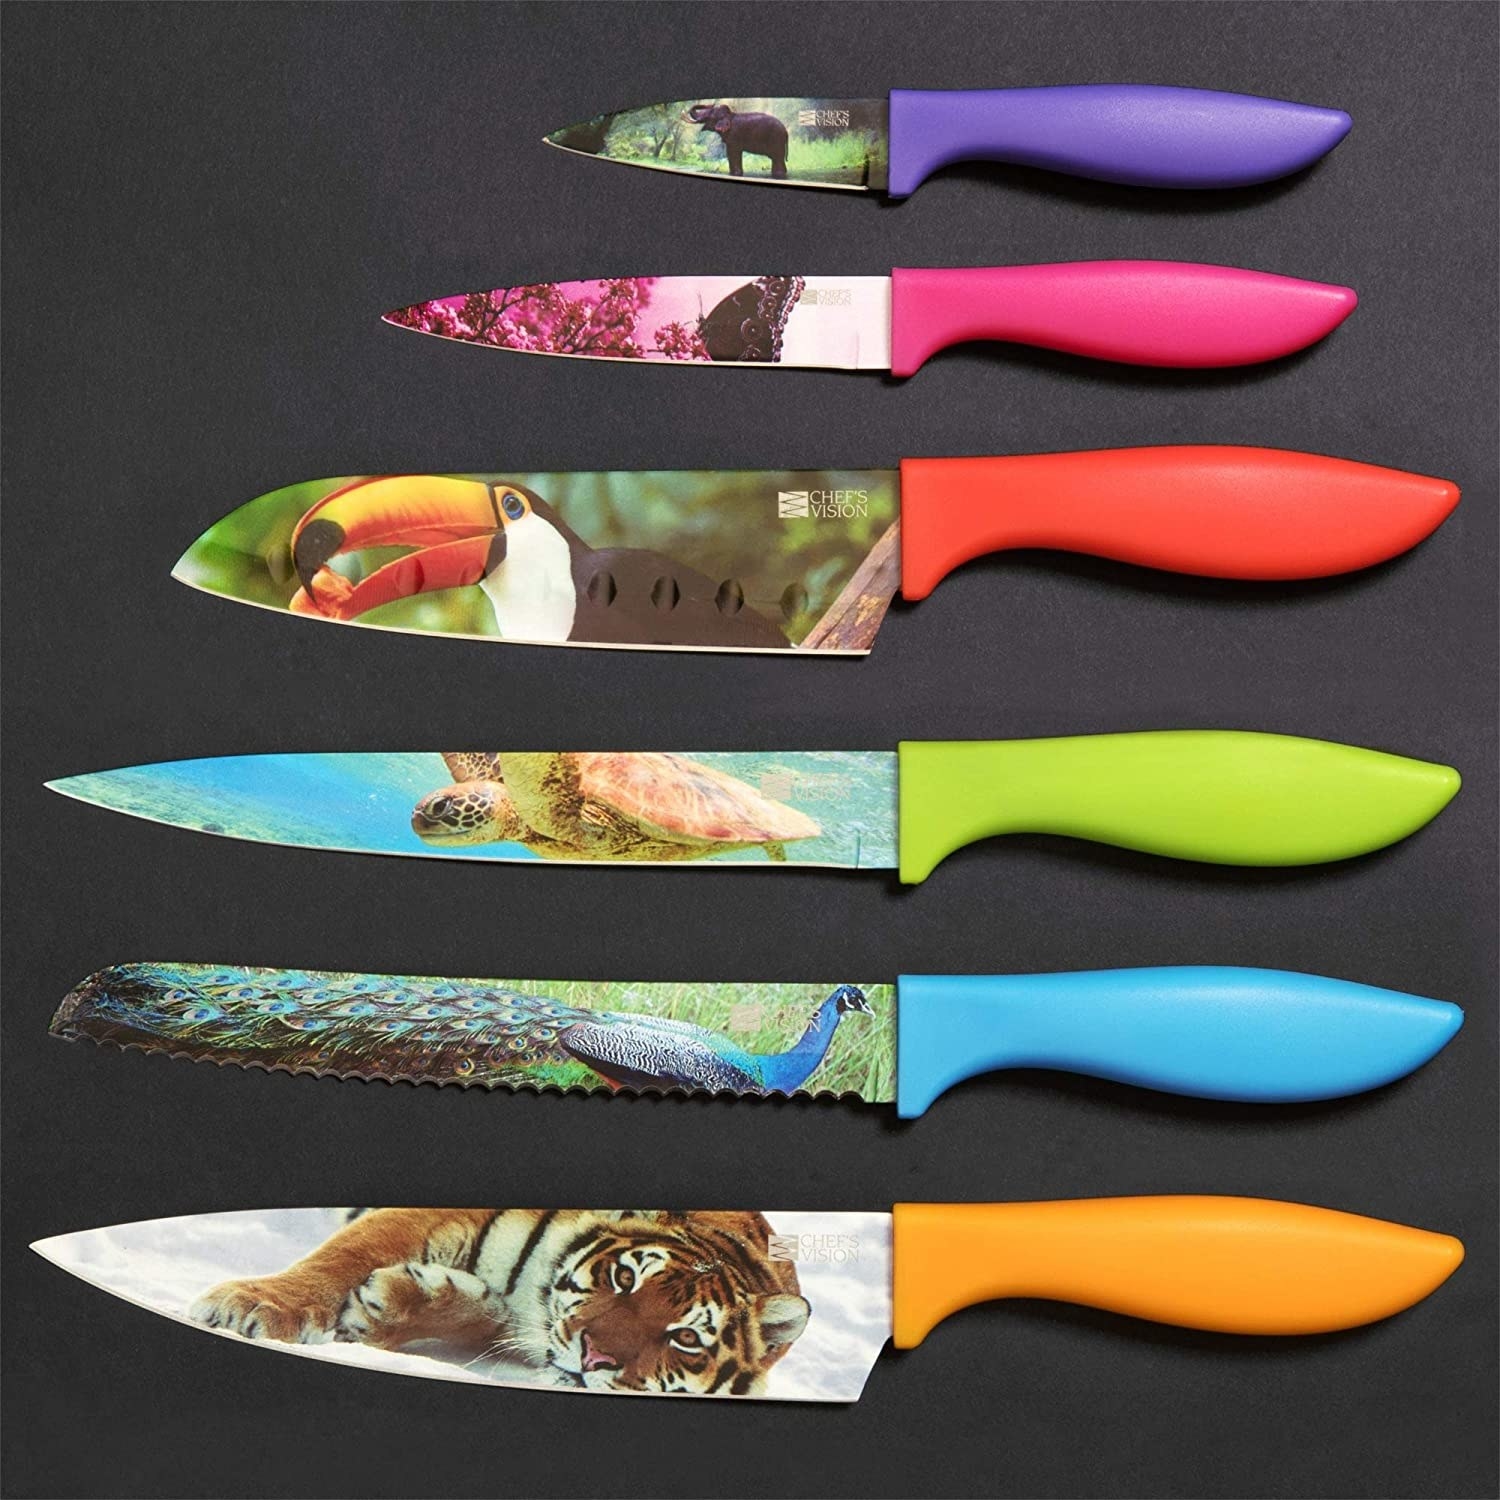 a flatlay of the kitchen knives printed with wildlife imagery